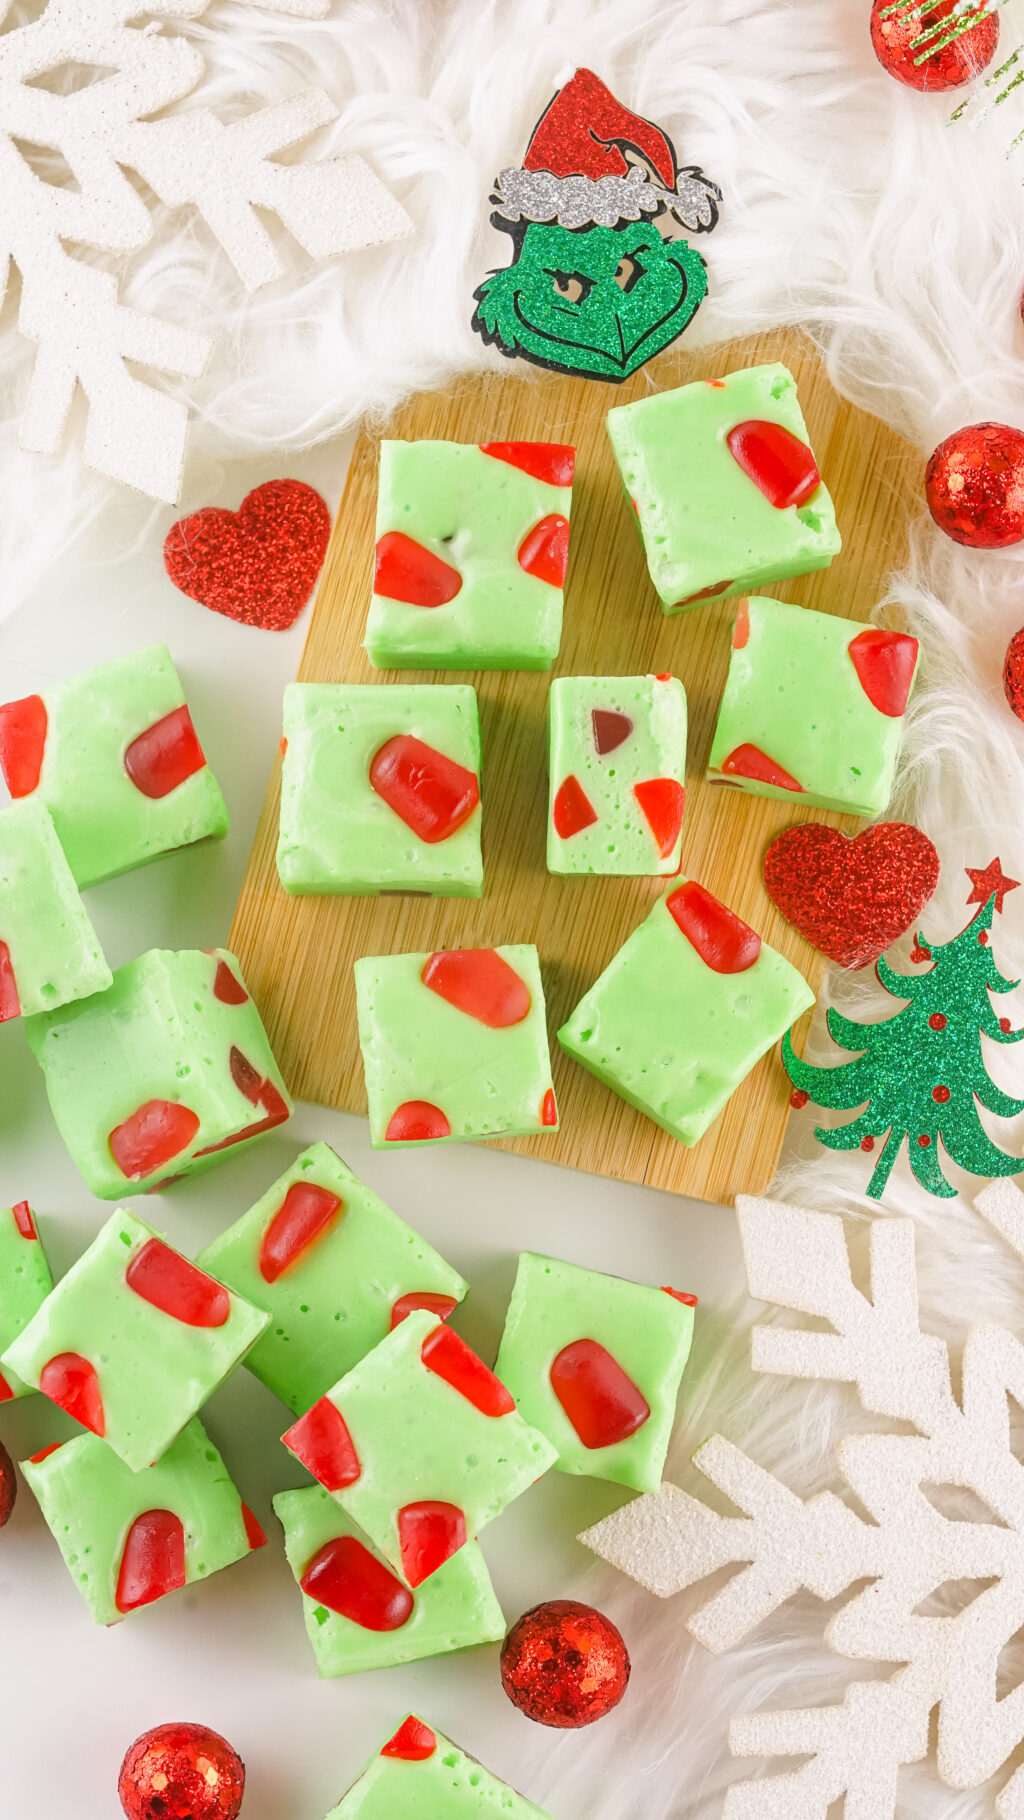 grinch christmas nougat candy spread out on table